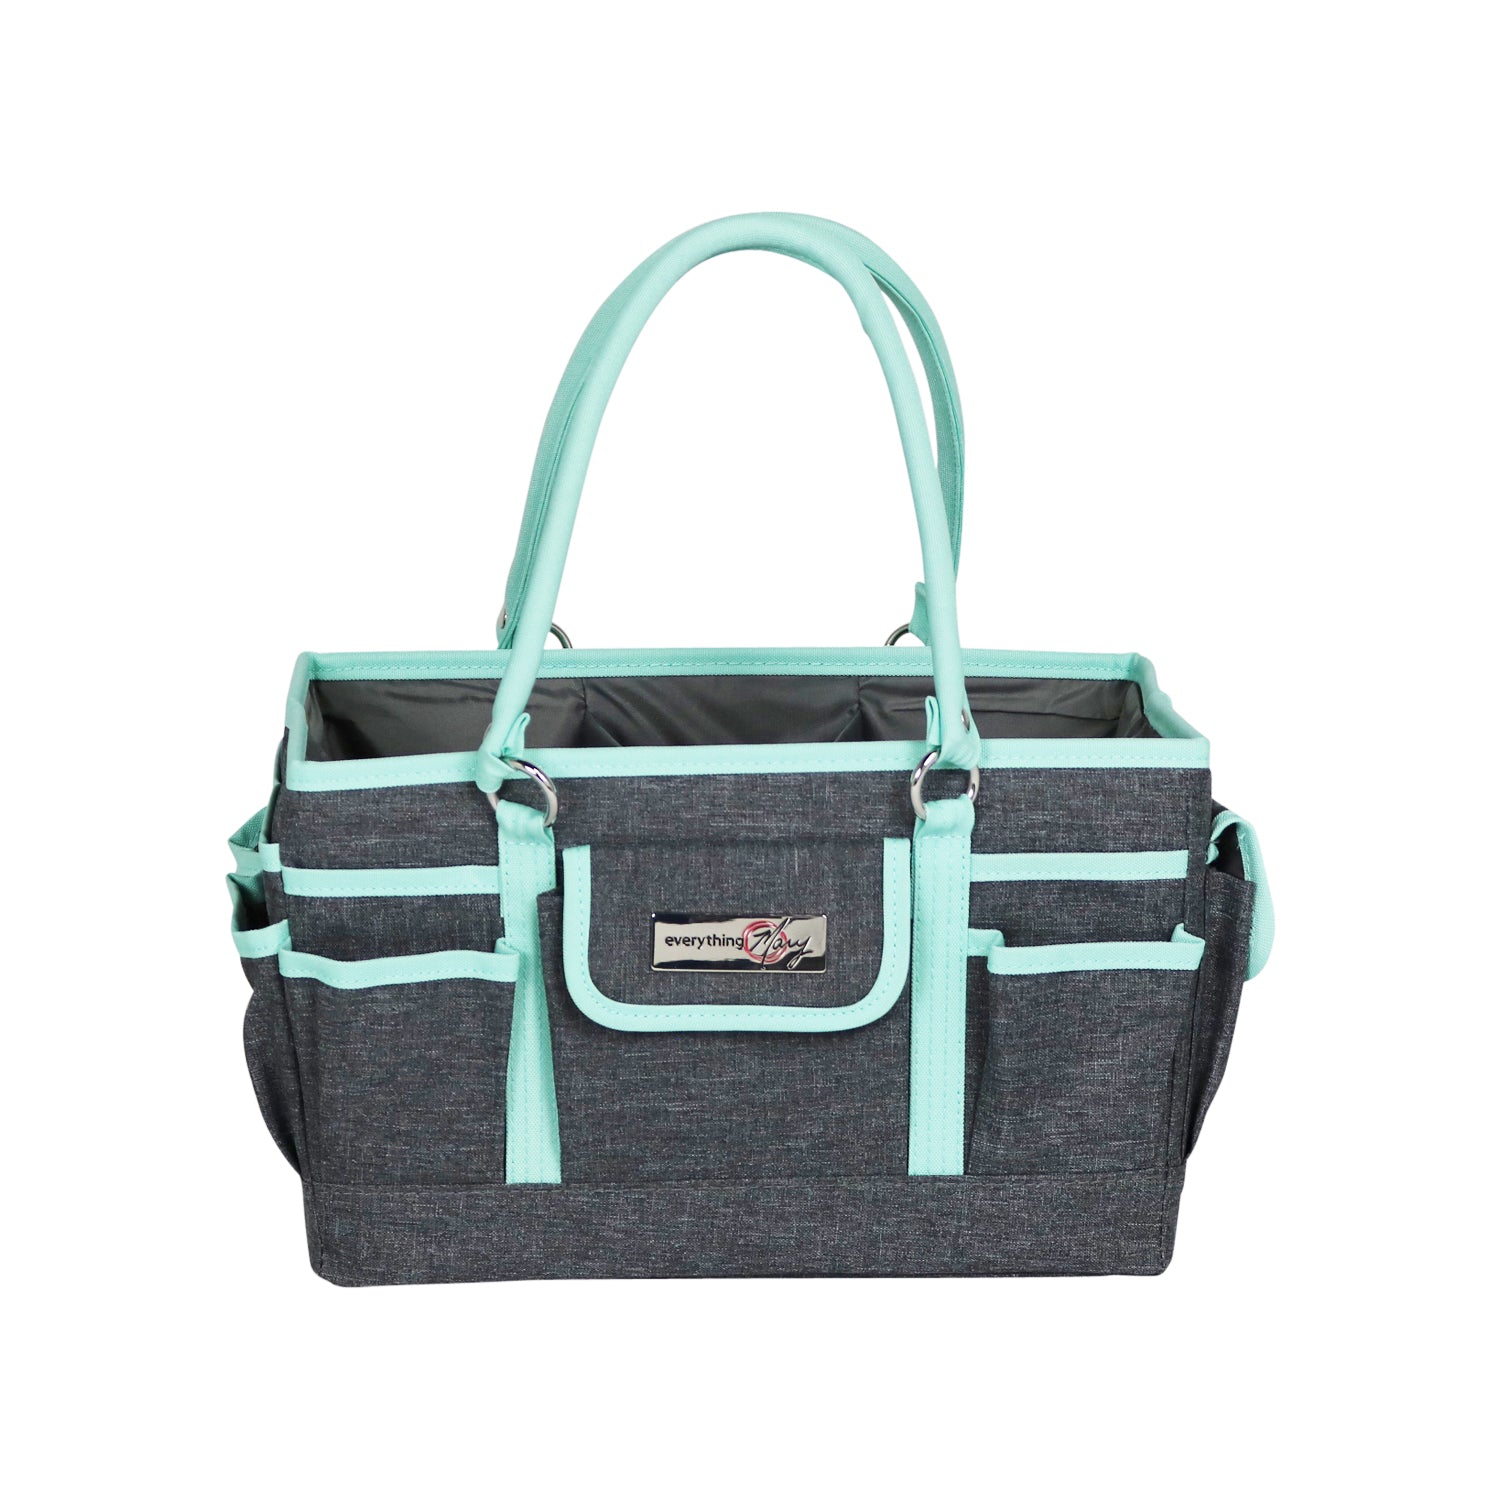 Store Tote Craft Organizer, Grey & Heather Teal - Everything Mary